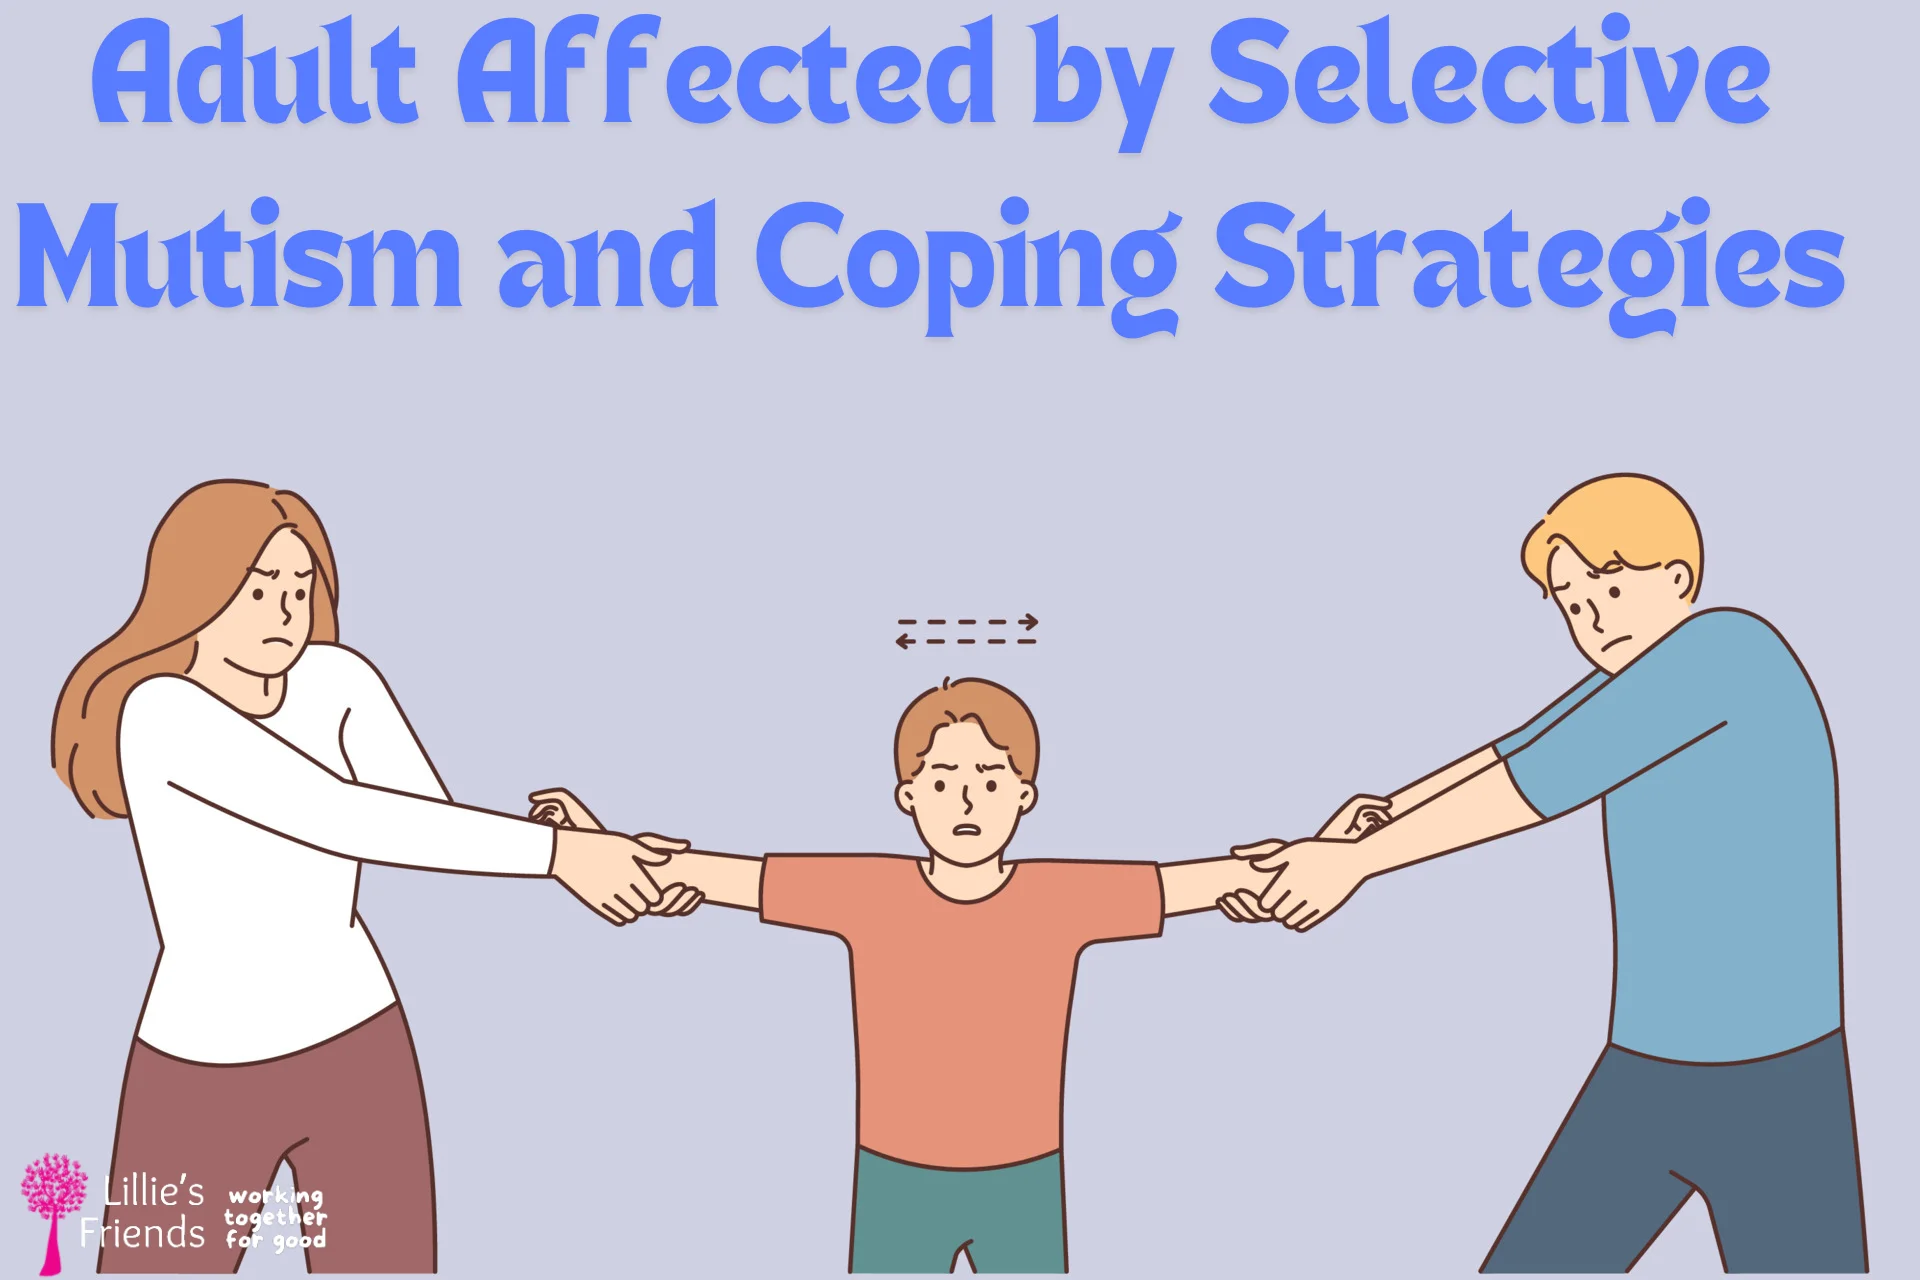 Adult Affected by Selective Mutism and Coping Strategies